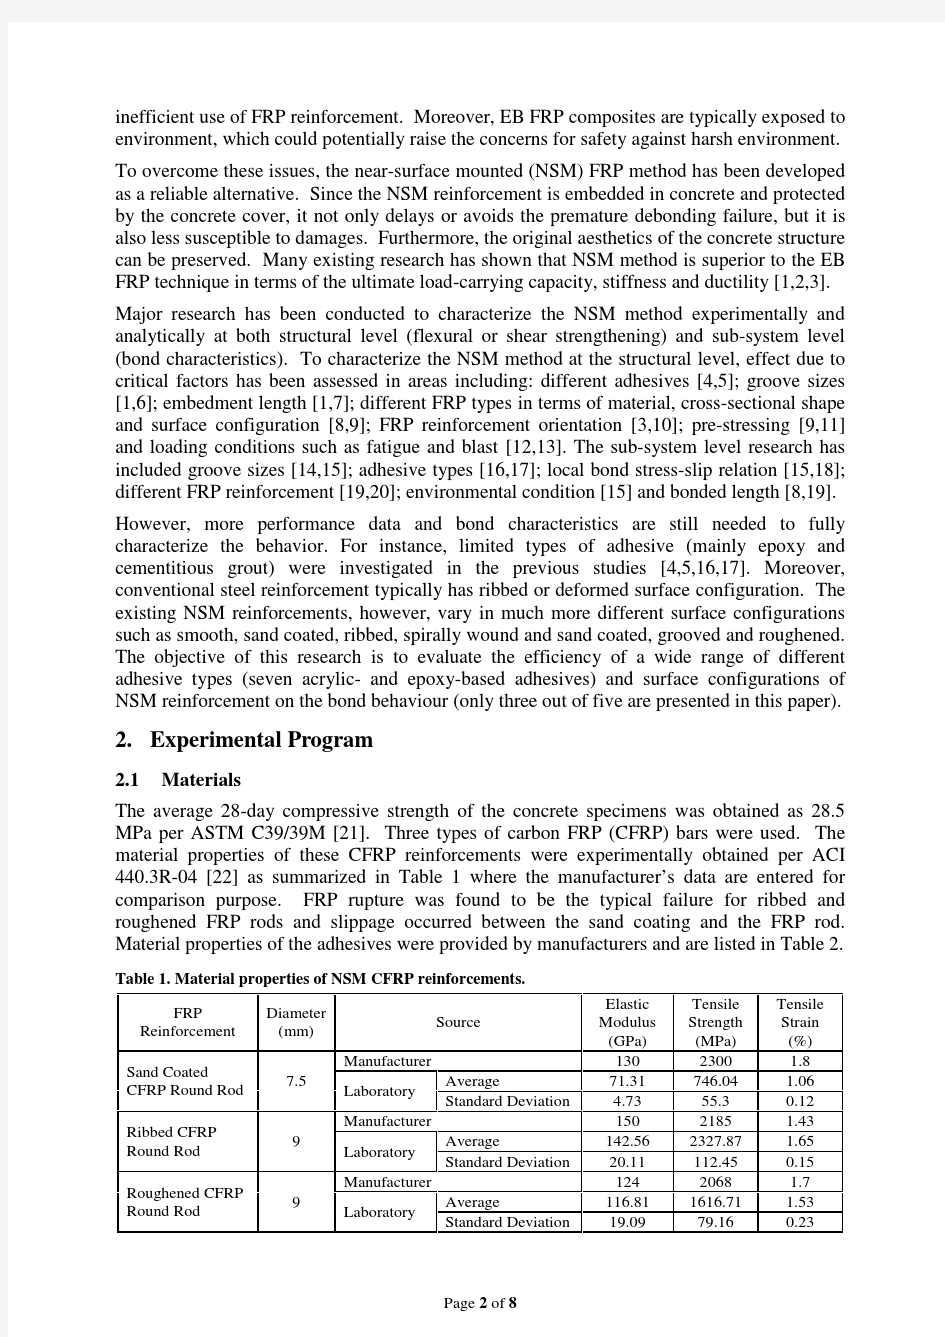 03_268_Lee, Yan-Gee Hui_BOND CHARACTERISTICS OF NSM REINFORCEMENT IN CONCRETE DUE TO ADHESIVE TYP